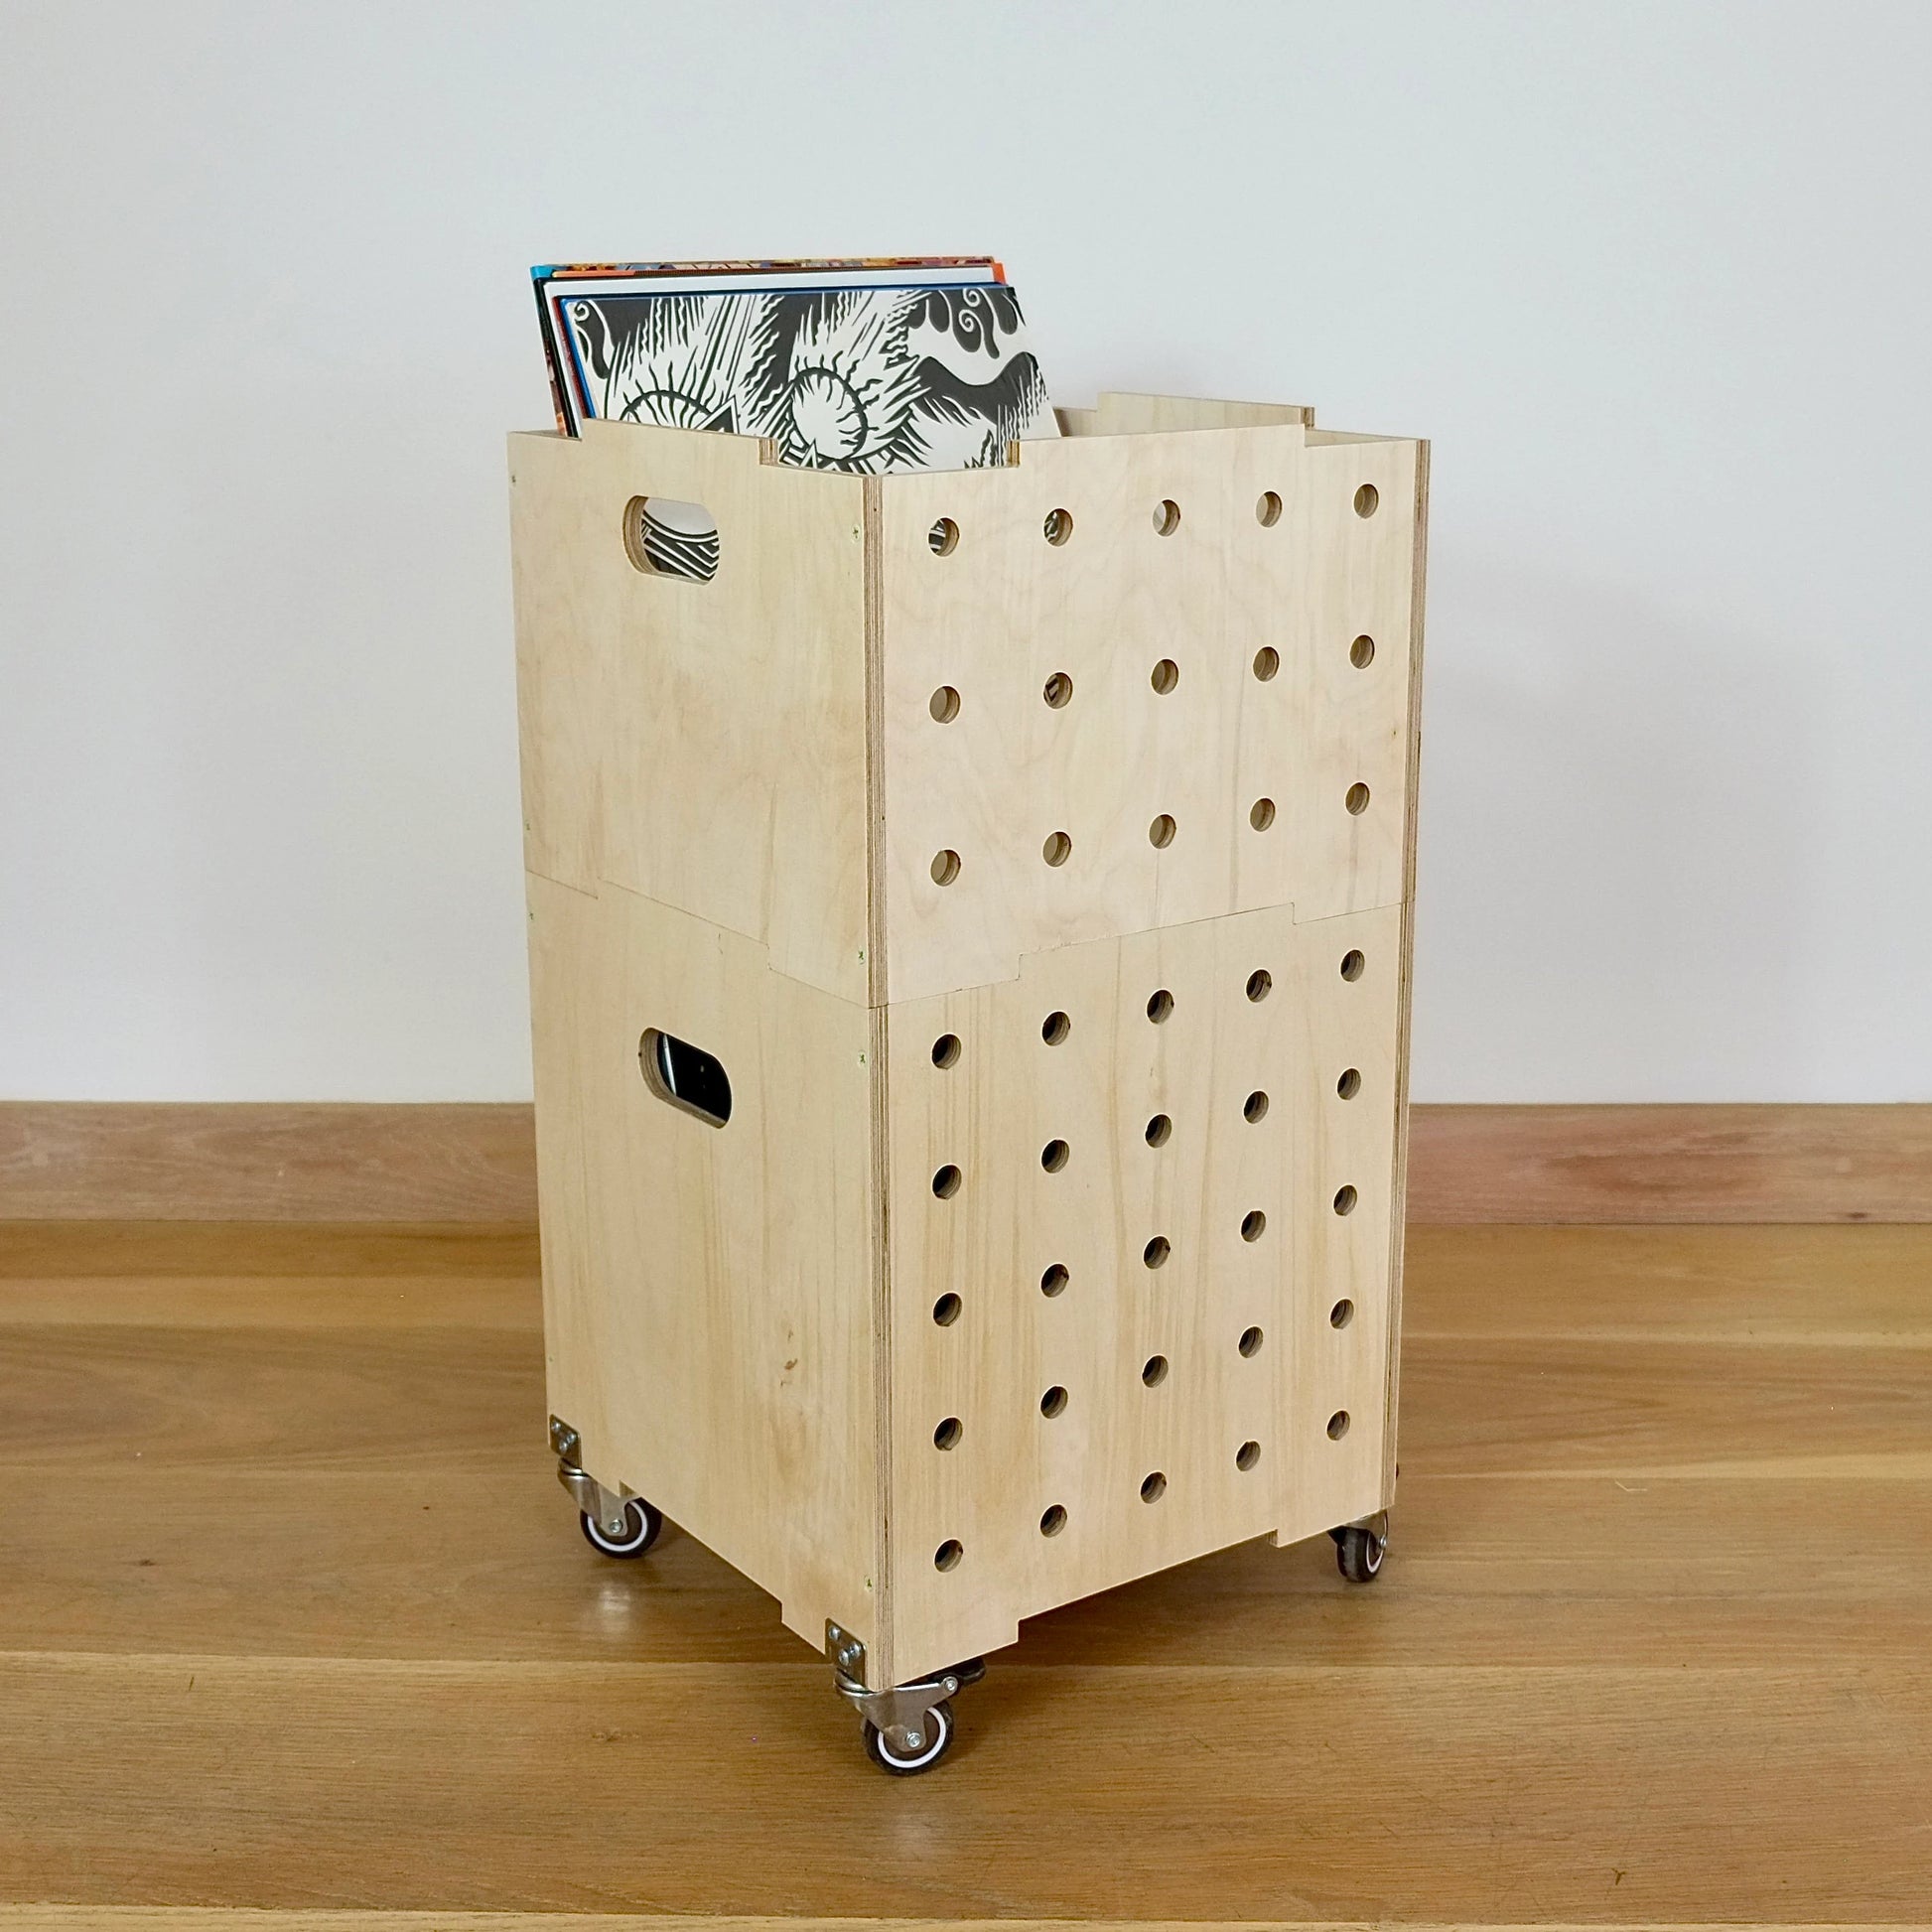 A stack of two modern plywood square shaped storage crates, faces diagonally to the right and sits on a wooden floor. There are eight rows of holes cut in the front facet, it has castors and displays records in the top crate.